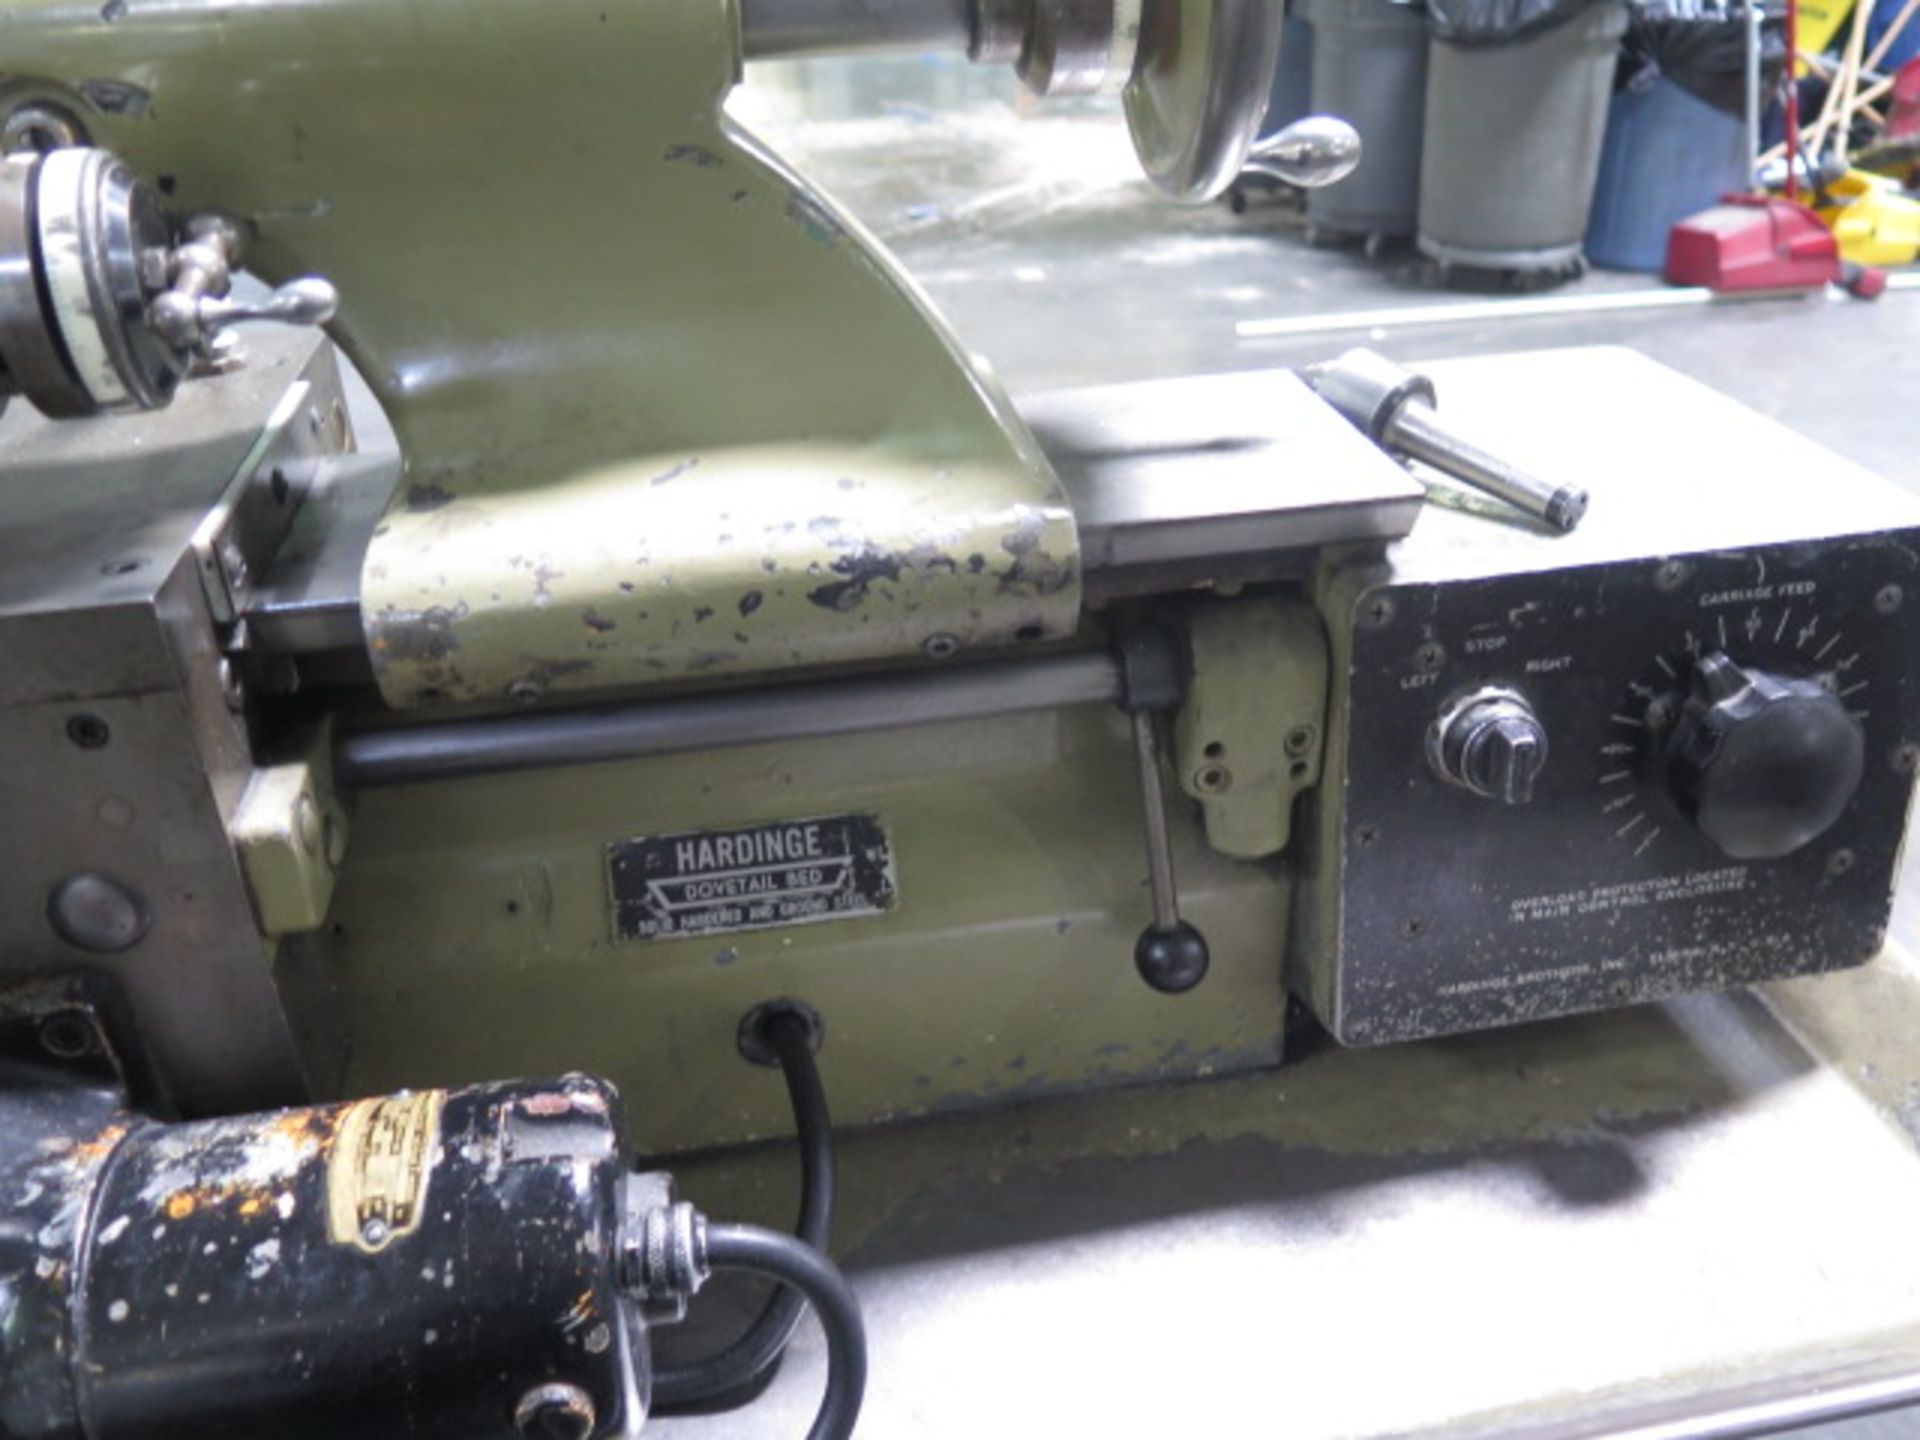 Hardinge TFB Second OP Lathe w/ 125-3000 RPM, 5C Collet Closer, PF, Aloris Tool Post, SOLD AS IS - Image 9 of 10